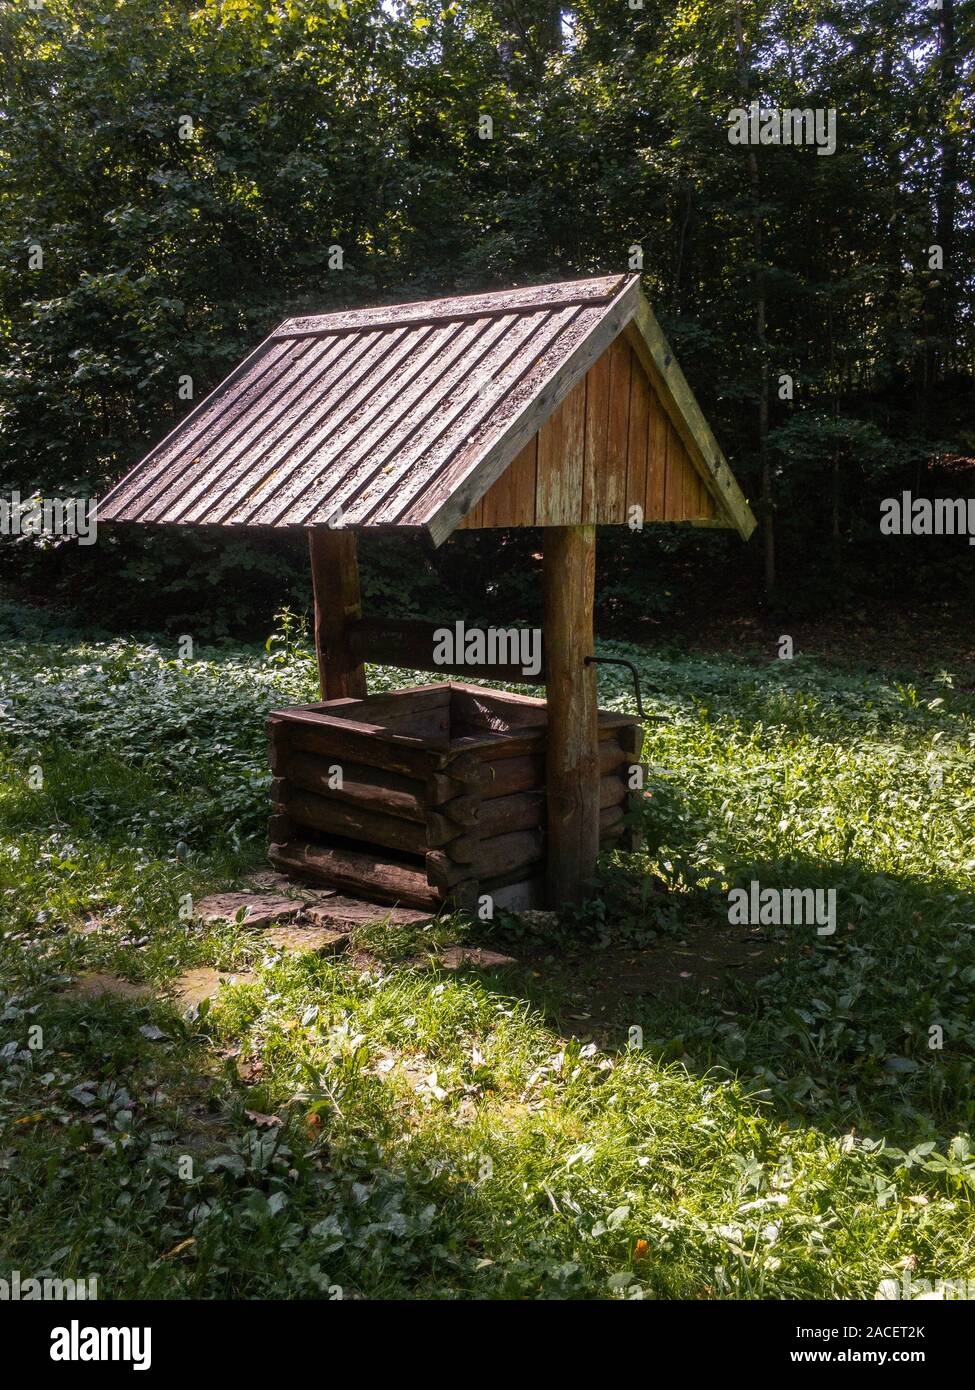 Old wooden well on green grass copy space Stock Photo